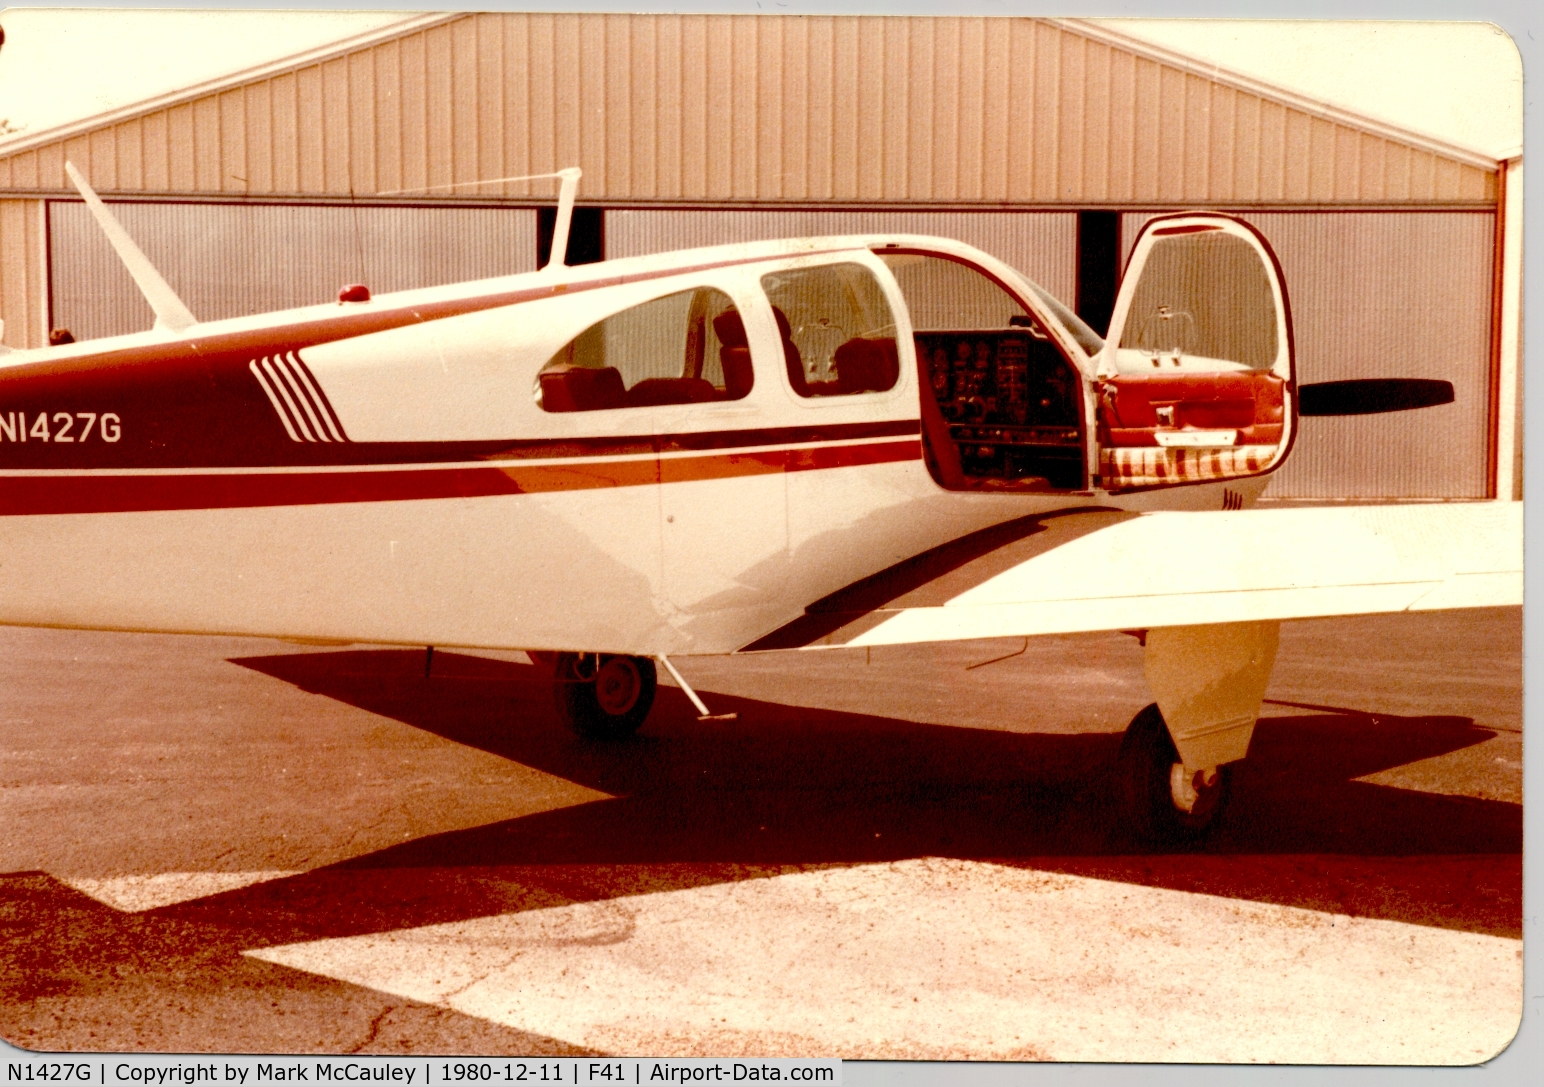 N1427G, 1962 Beech P35 Bonanza C/N D-6903, P35 Bonanza N1427G at Poplawski Aircraft Paint in Ennis, TX (1980). First roll-out after fresh paint.